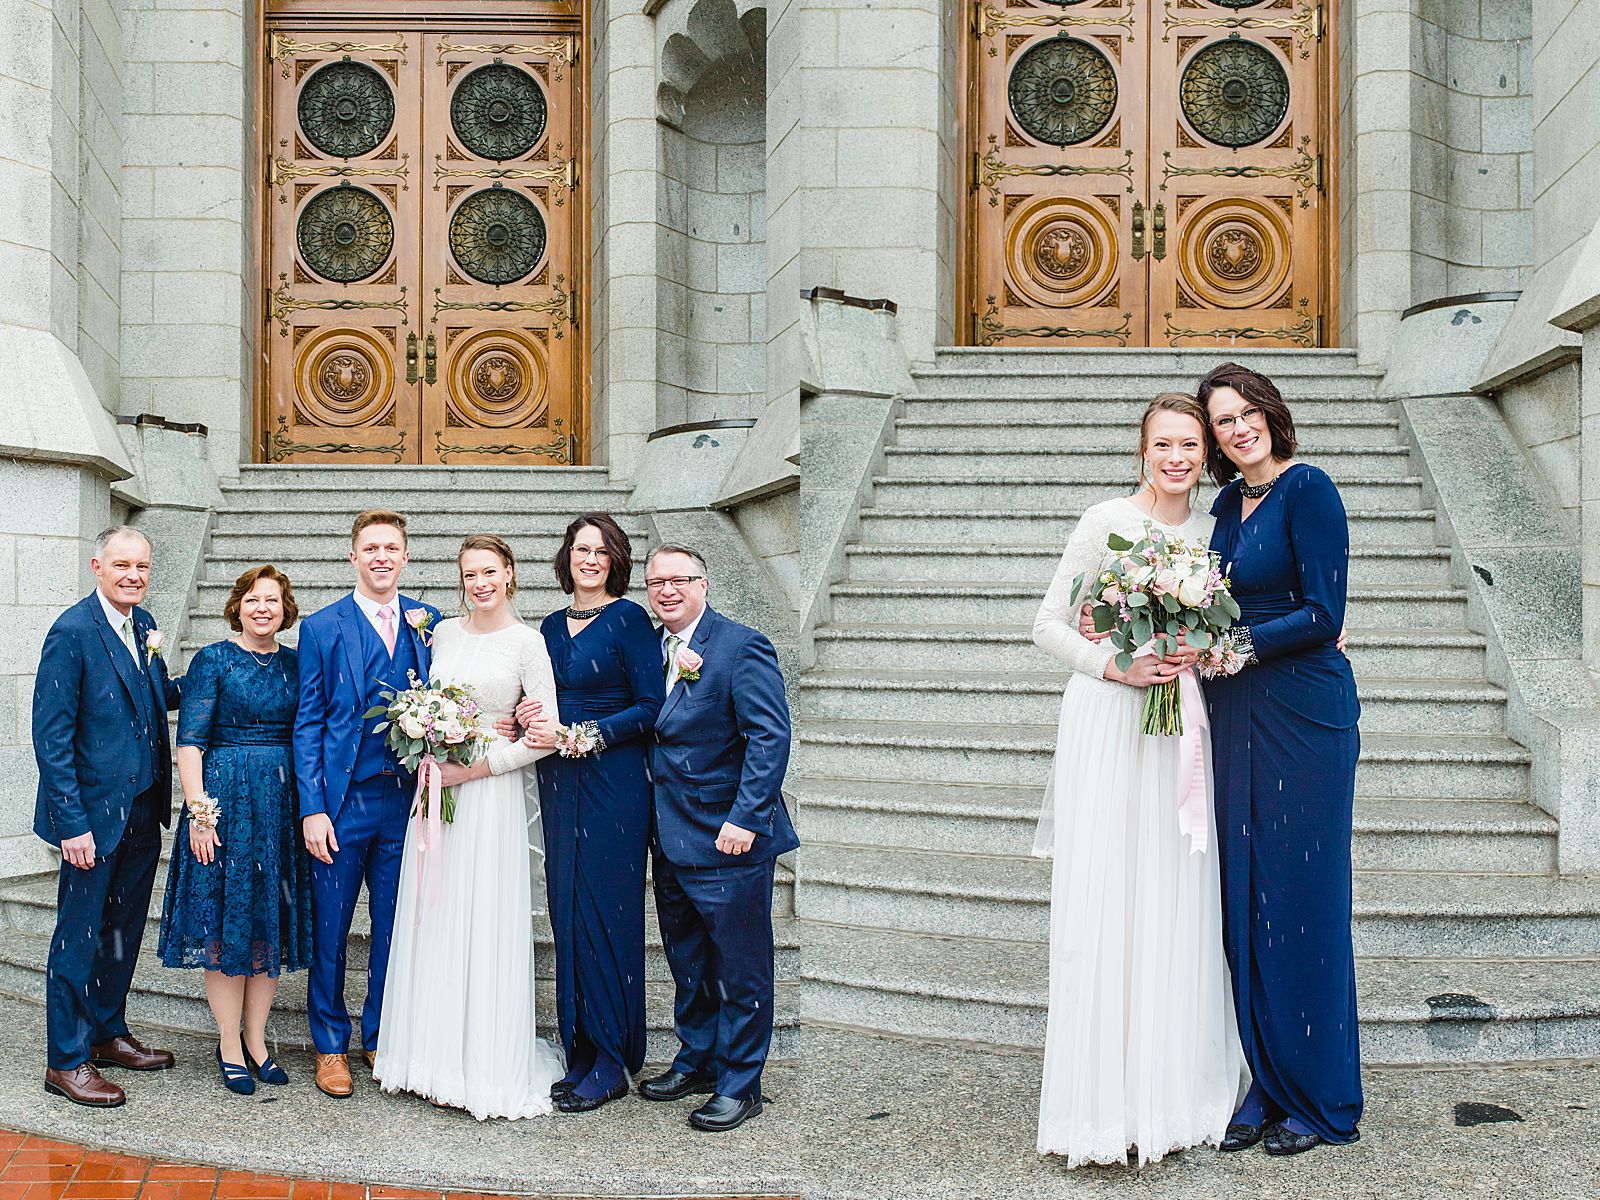 Salt Lake Temple Wedding | Family Pictures 